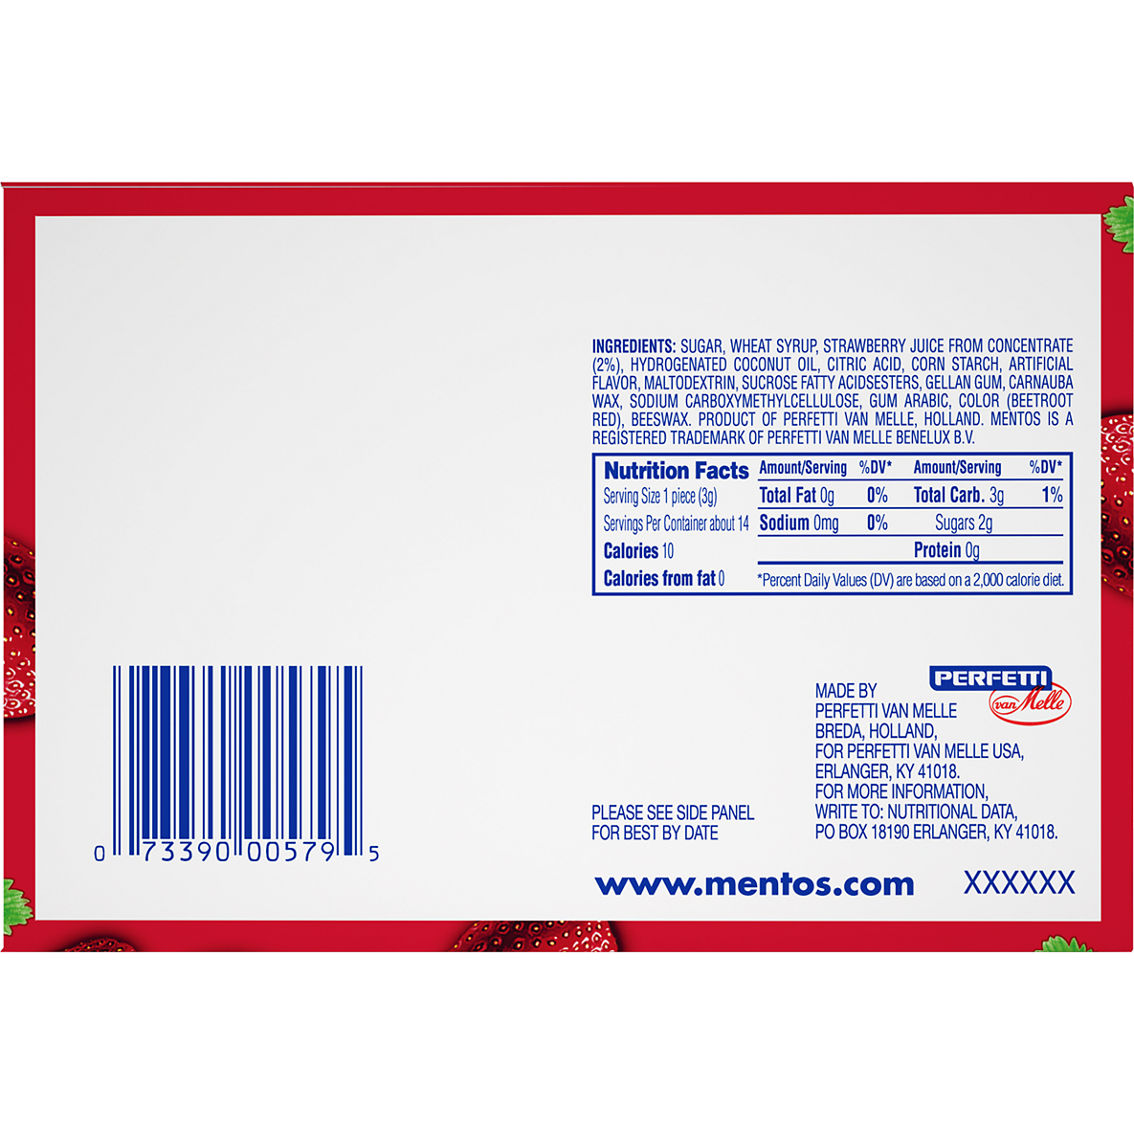 Mentos Strawberry Single Roll Candy 1.32 oz. - Image 2 of 2